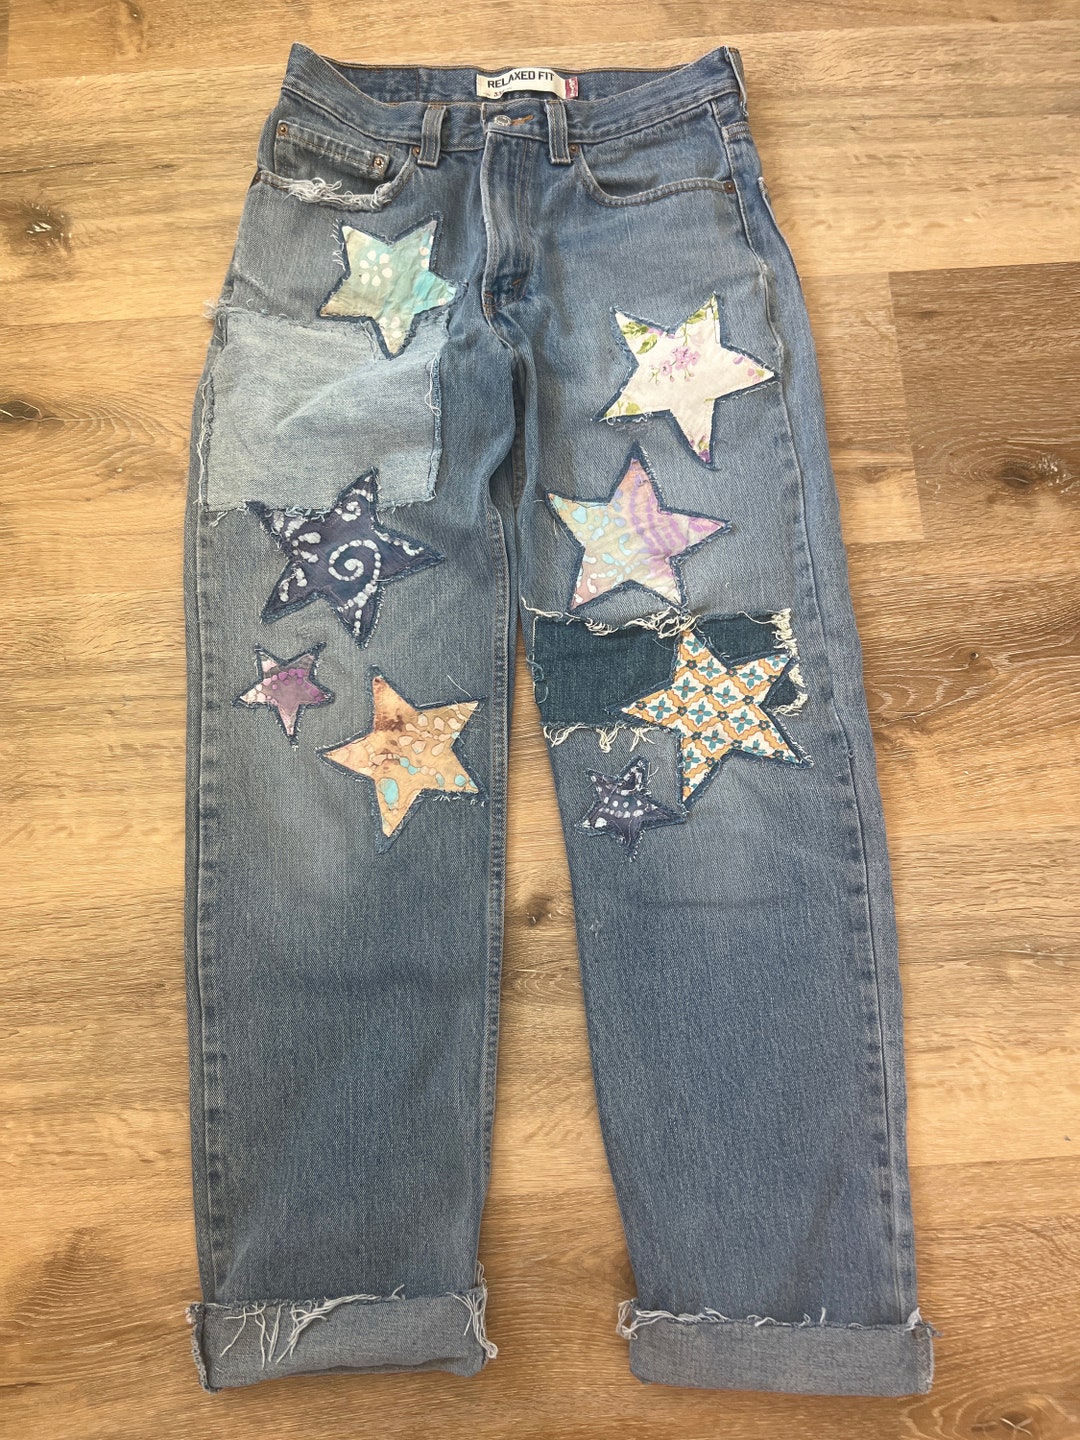 Patched Jeans Festival Jeans Vintage Patches Upcycled - Etsy